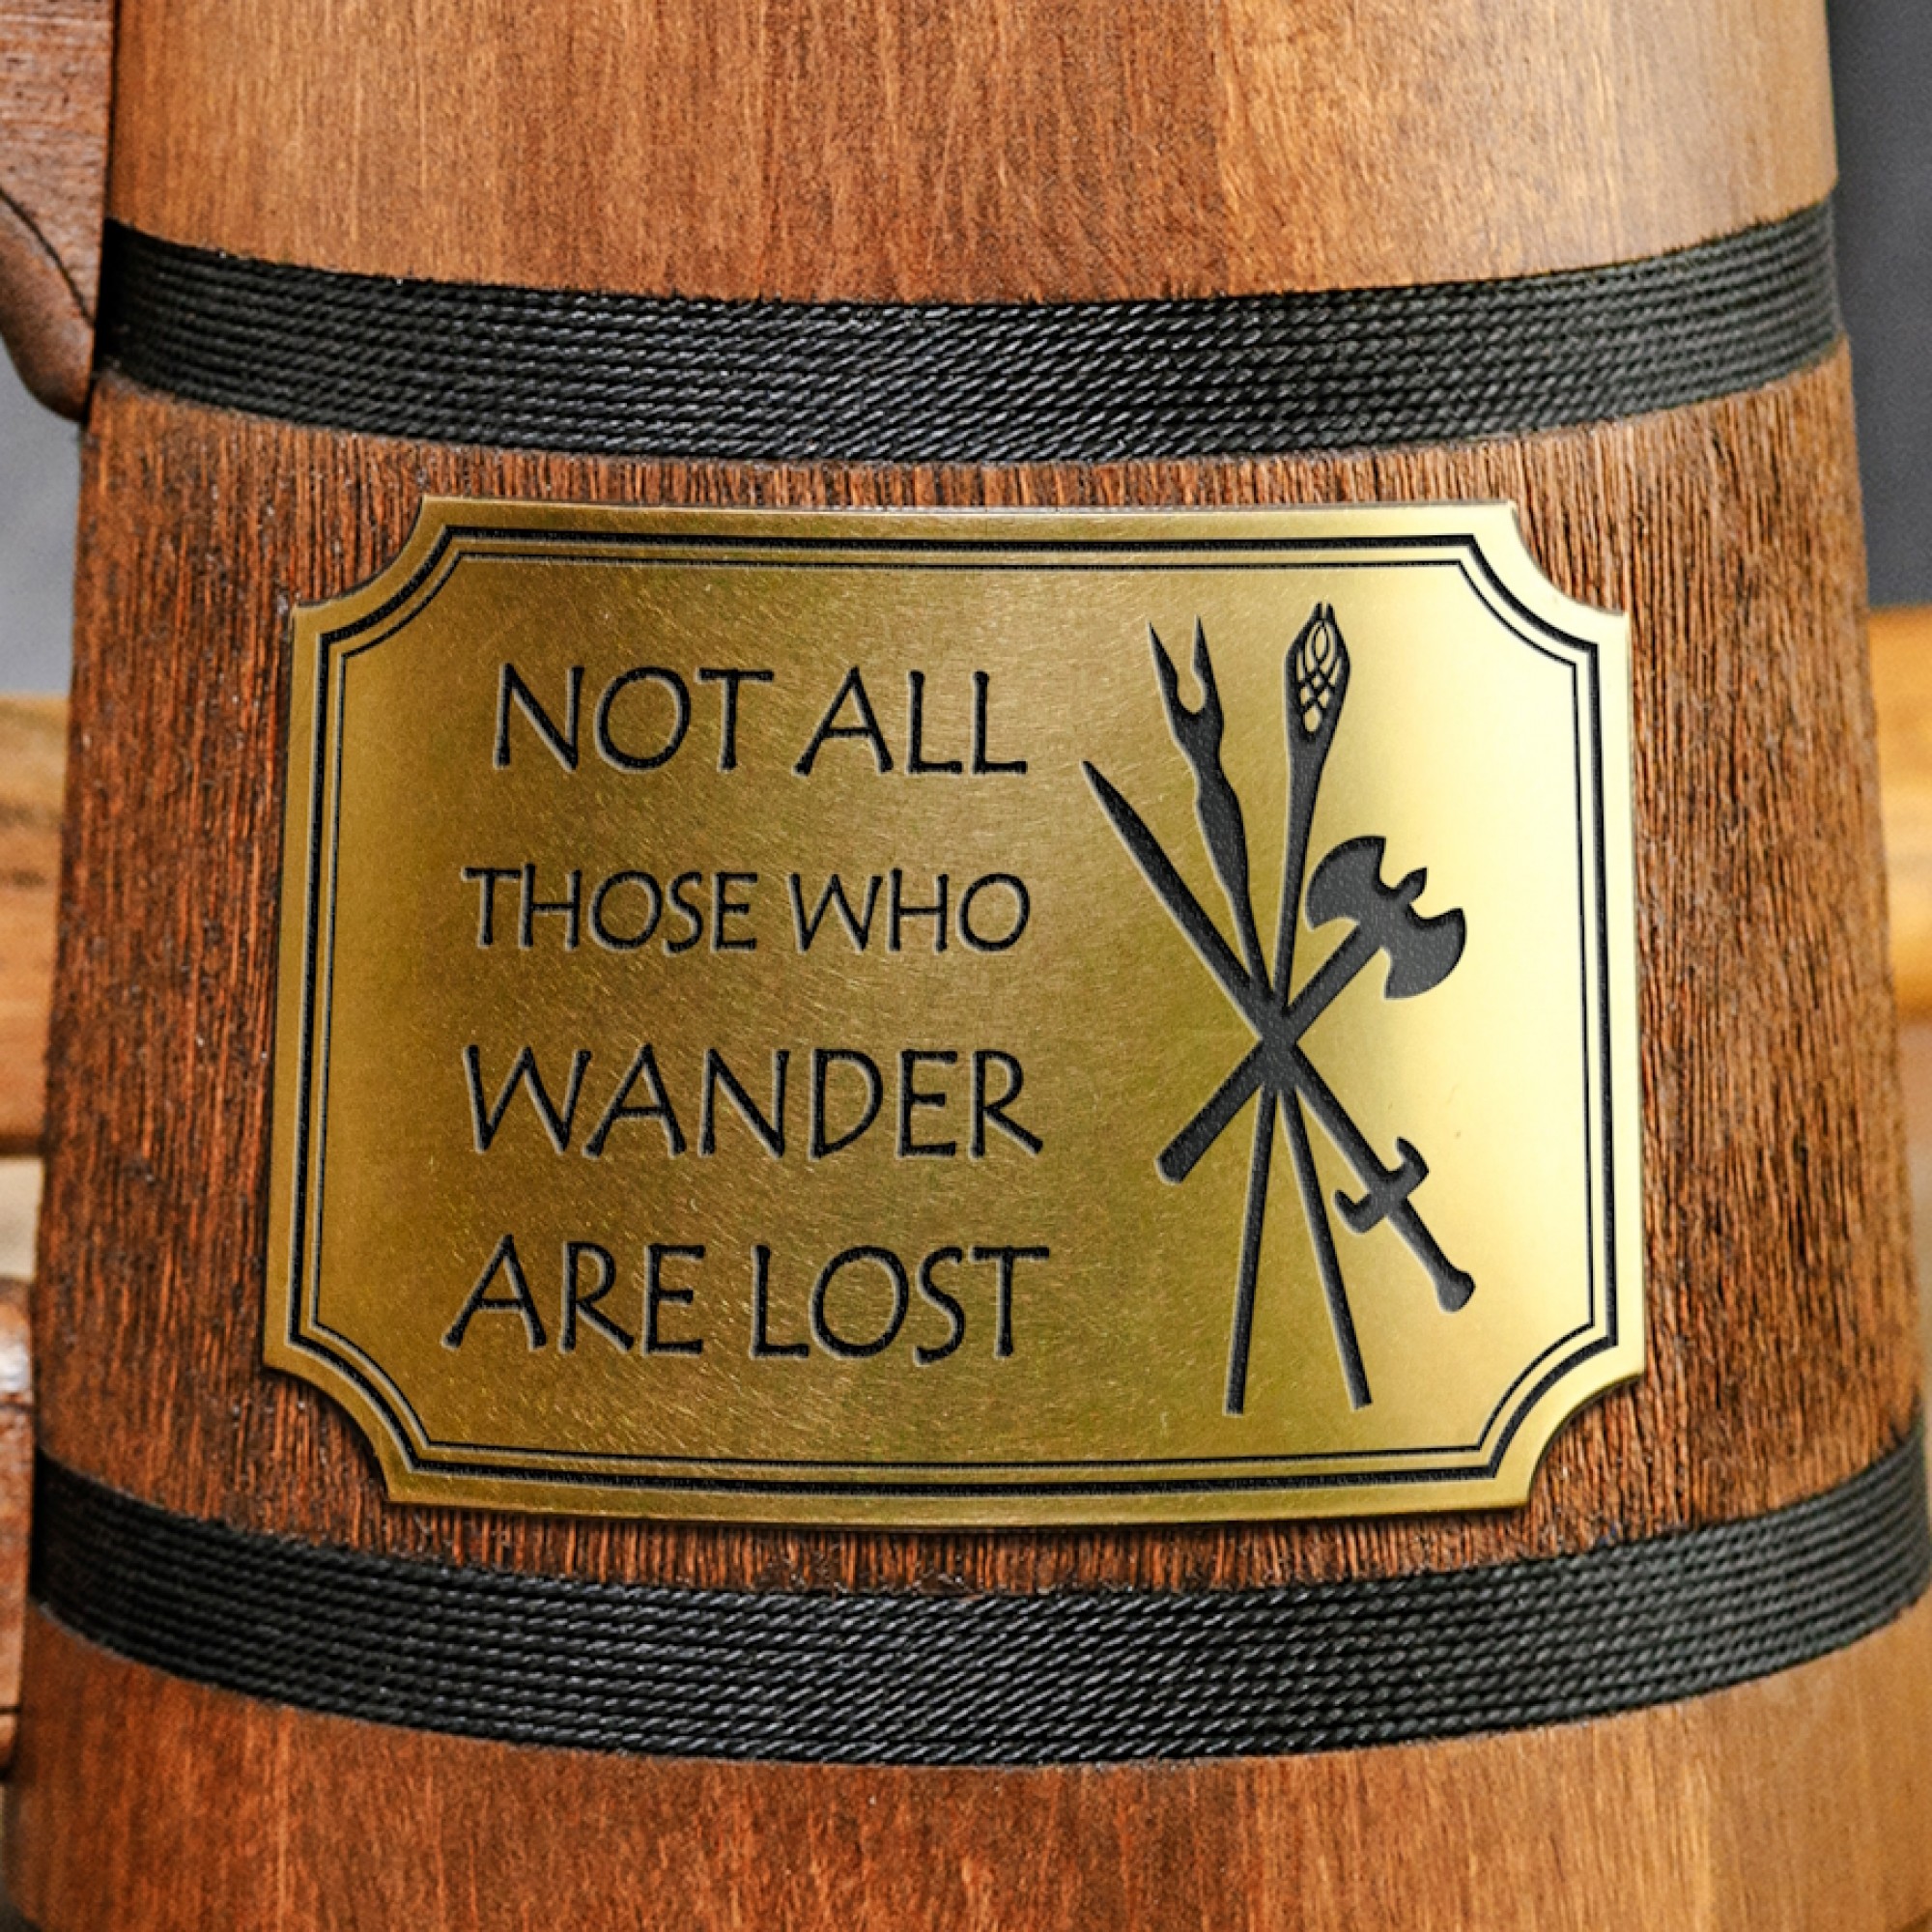 Lord of the Rings LotR - Not all those who wonder are lost - 20 oz